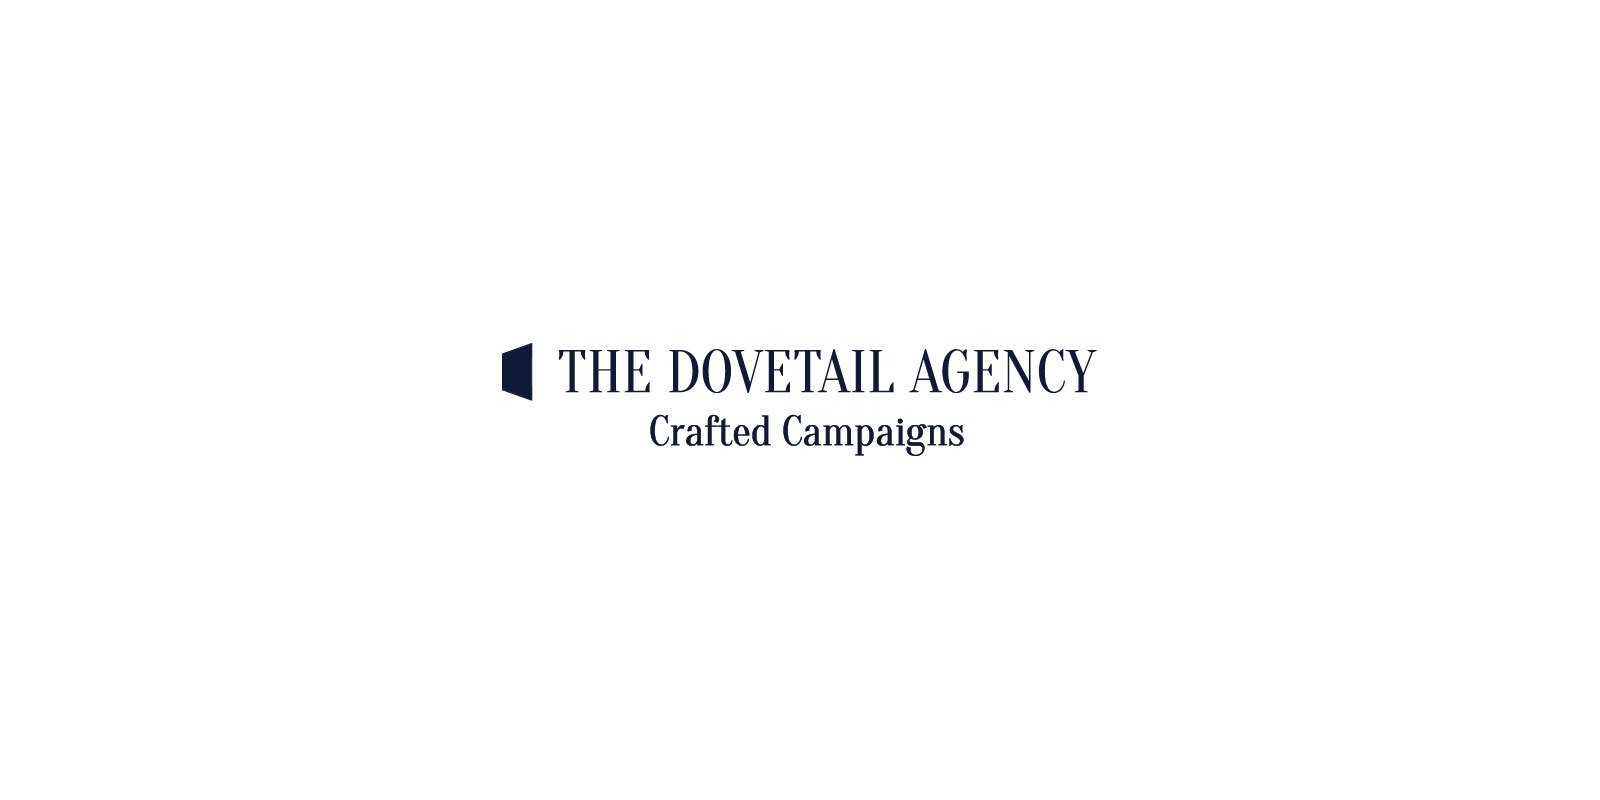 The Dovetail Agency